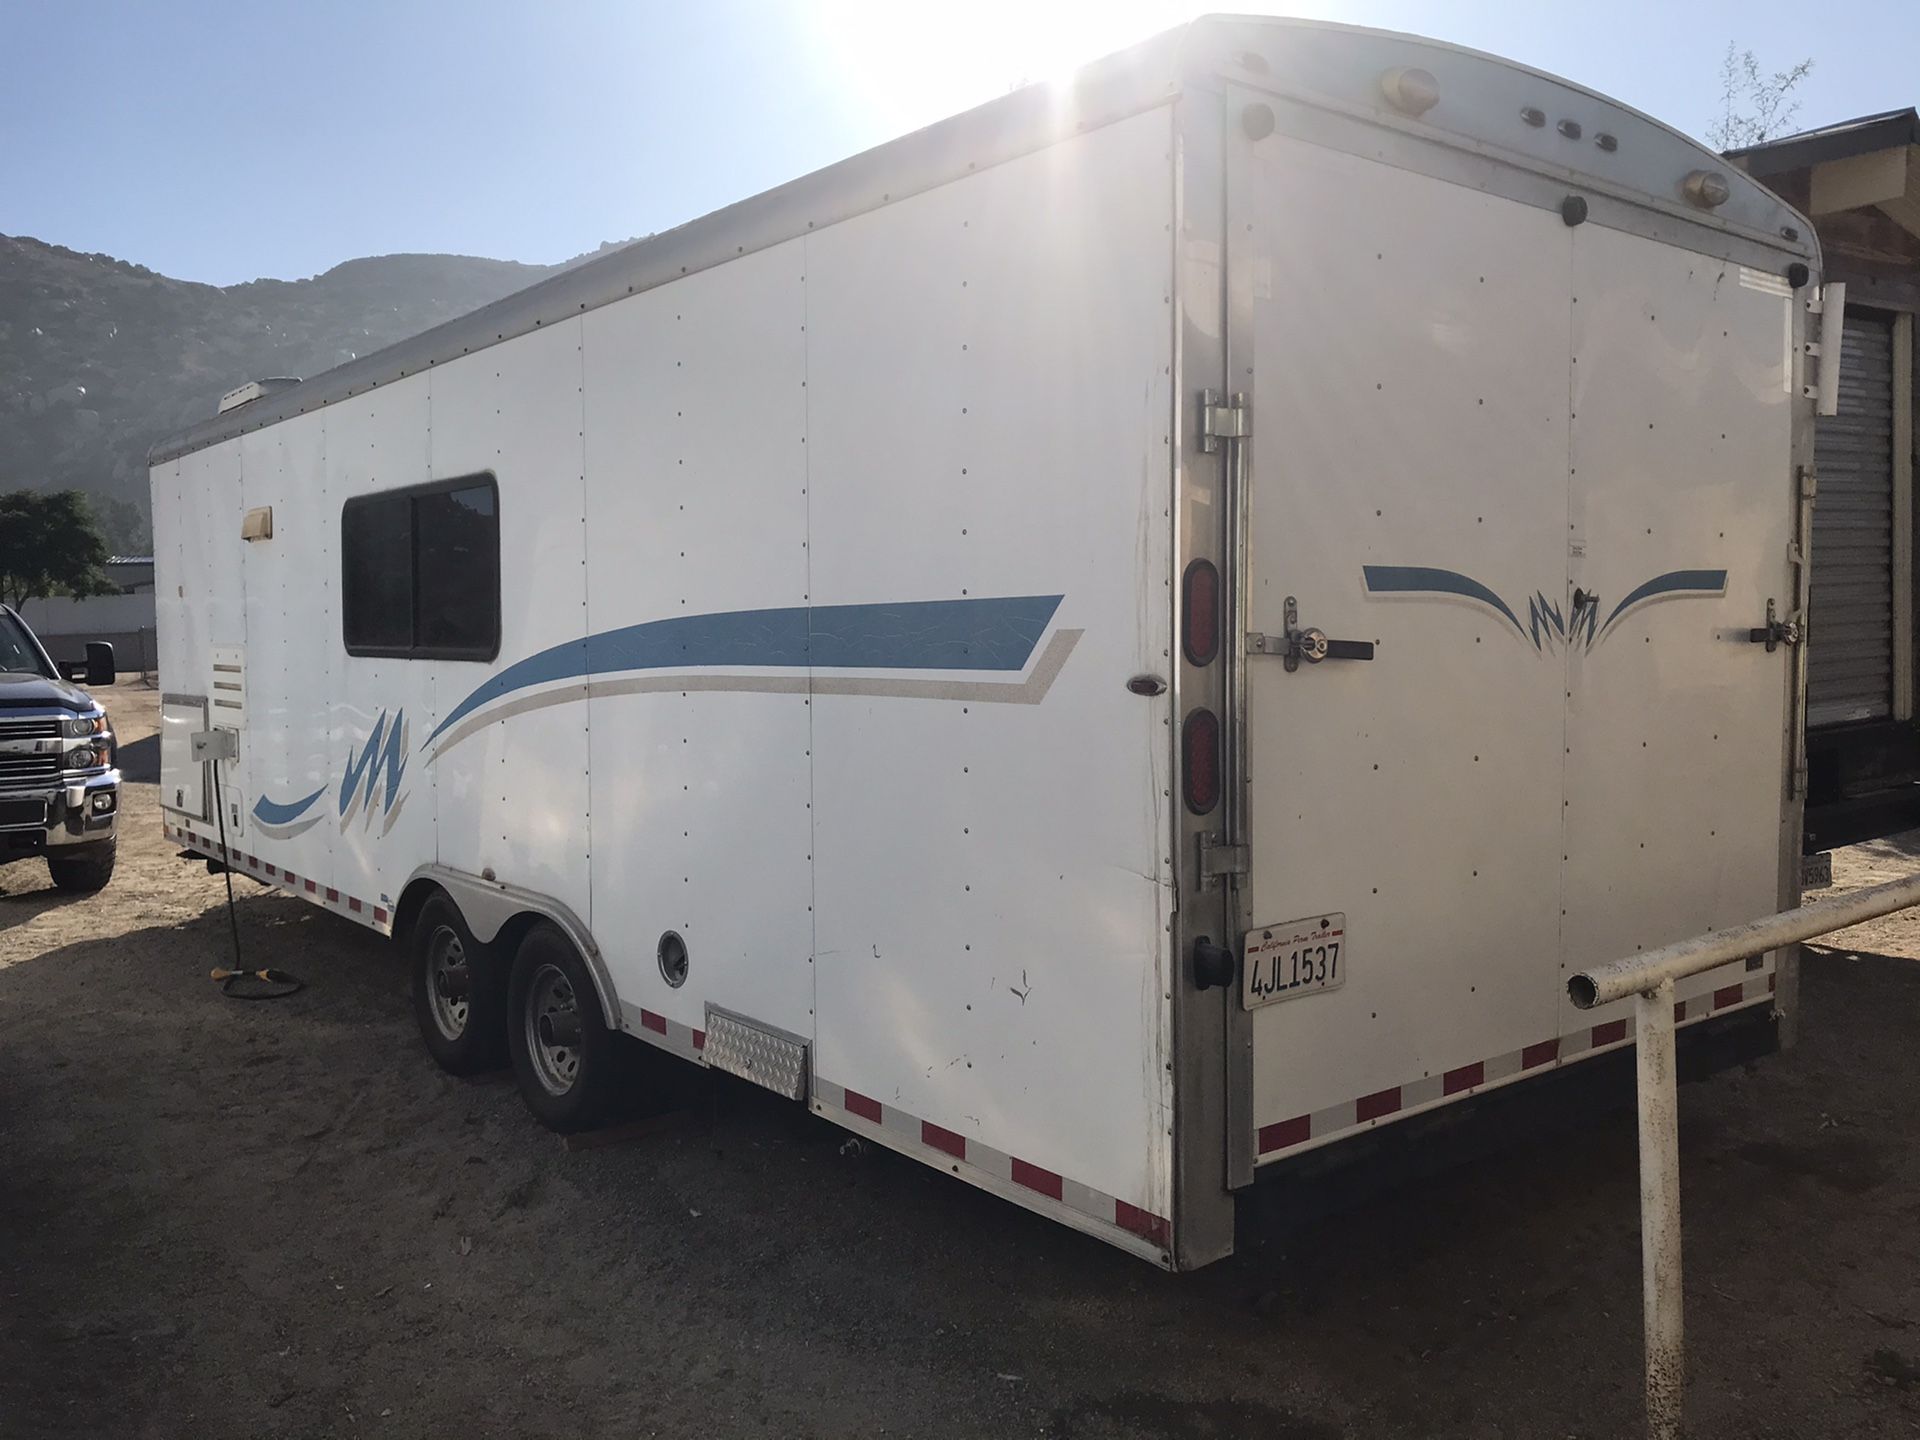 Mirage 2005 Toy hauler trailer with small kitchen and bath with shower Can Sleep up to three people $$ 7,900 Serious people only